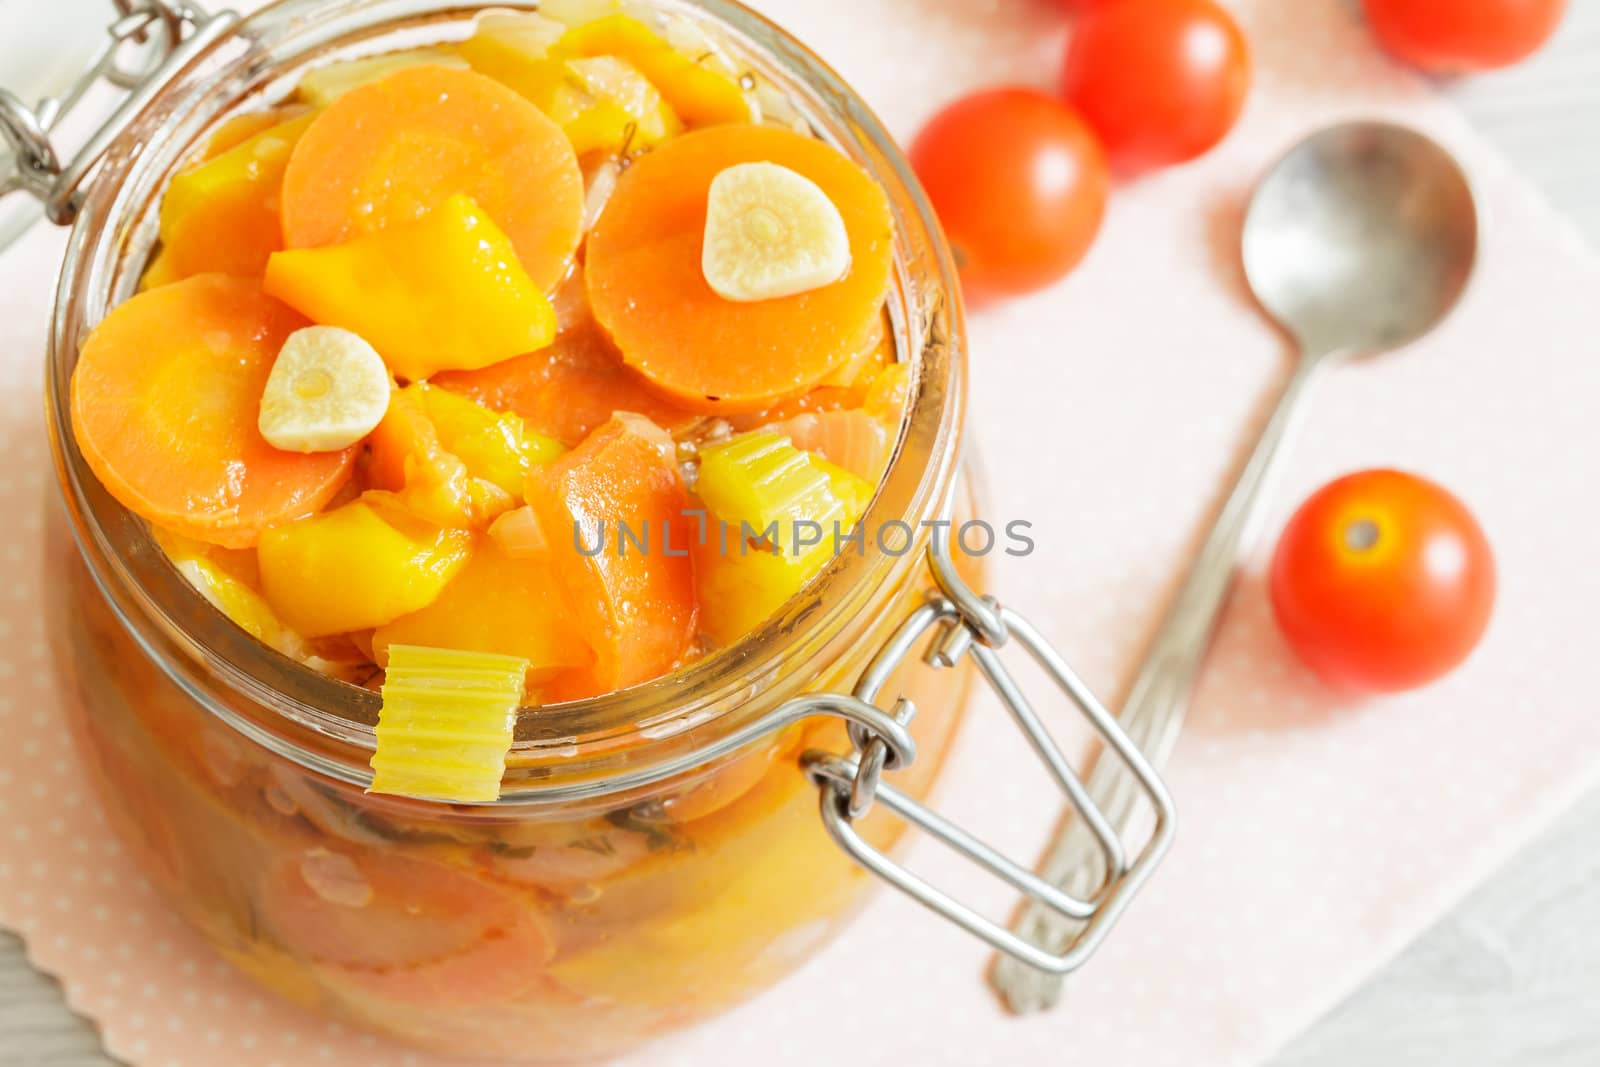 Stewed homemade vegetables in the glass jar